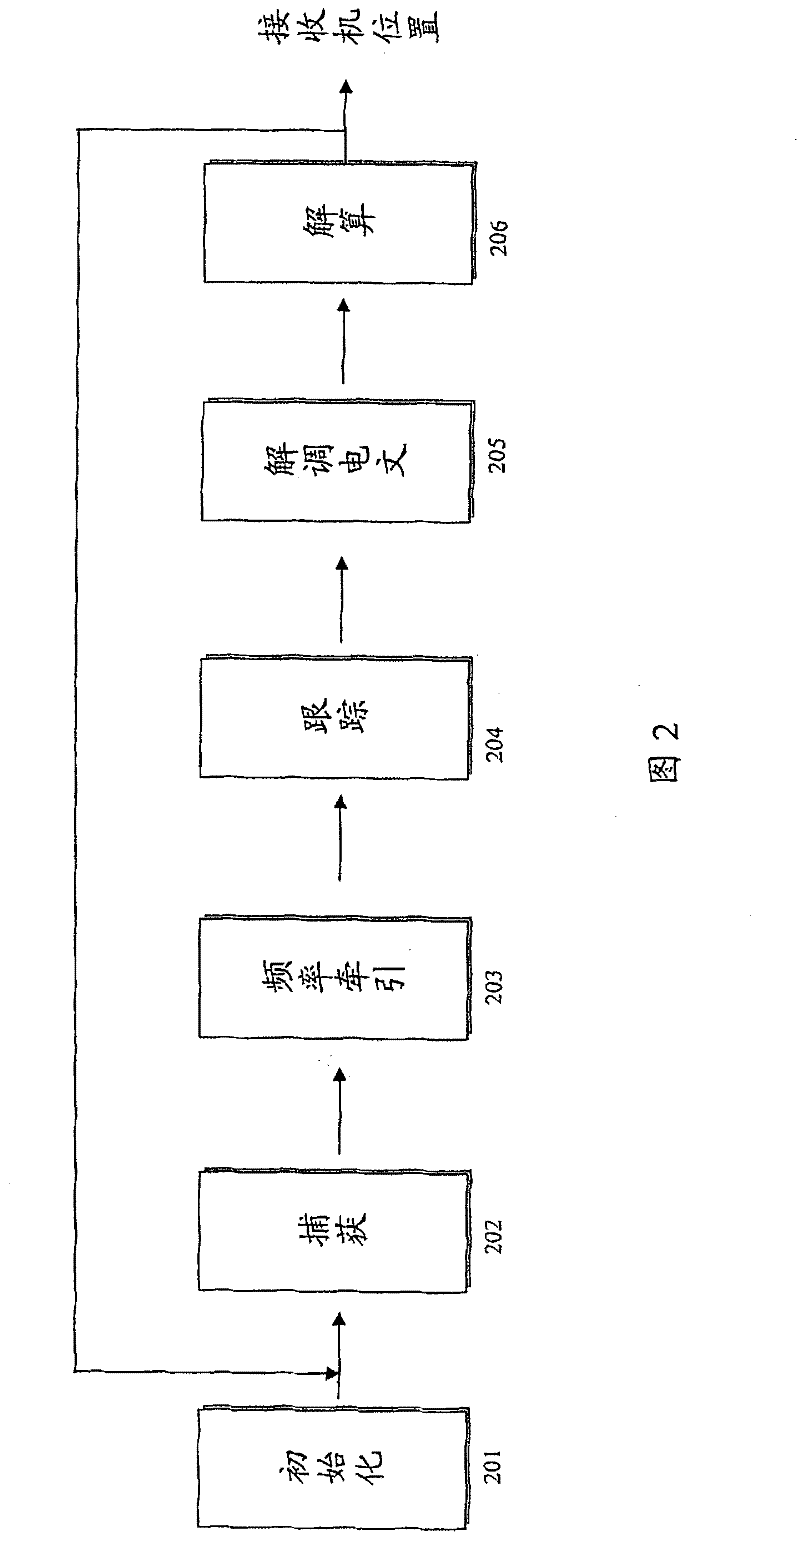 Low-cost timing and synchronization method and device for global positioning system receiver